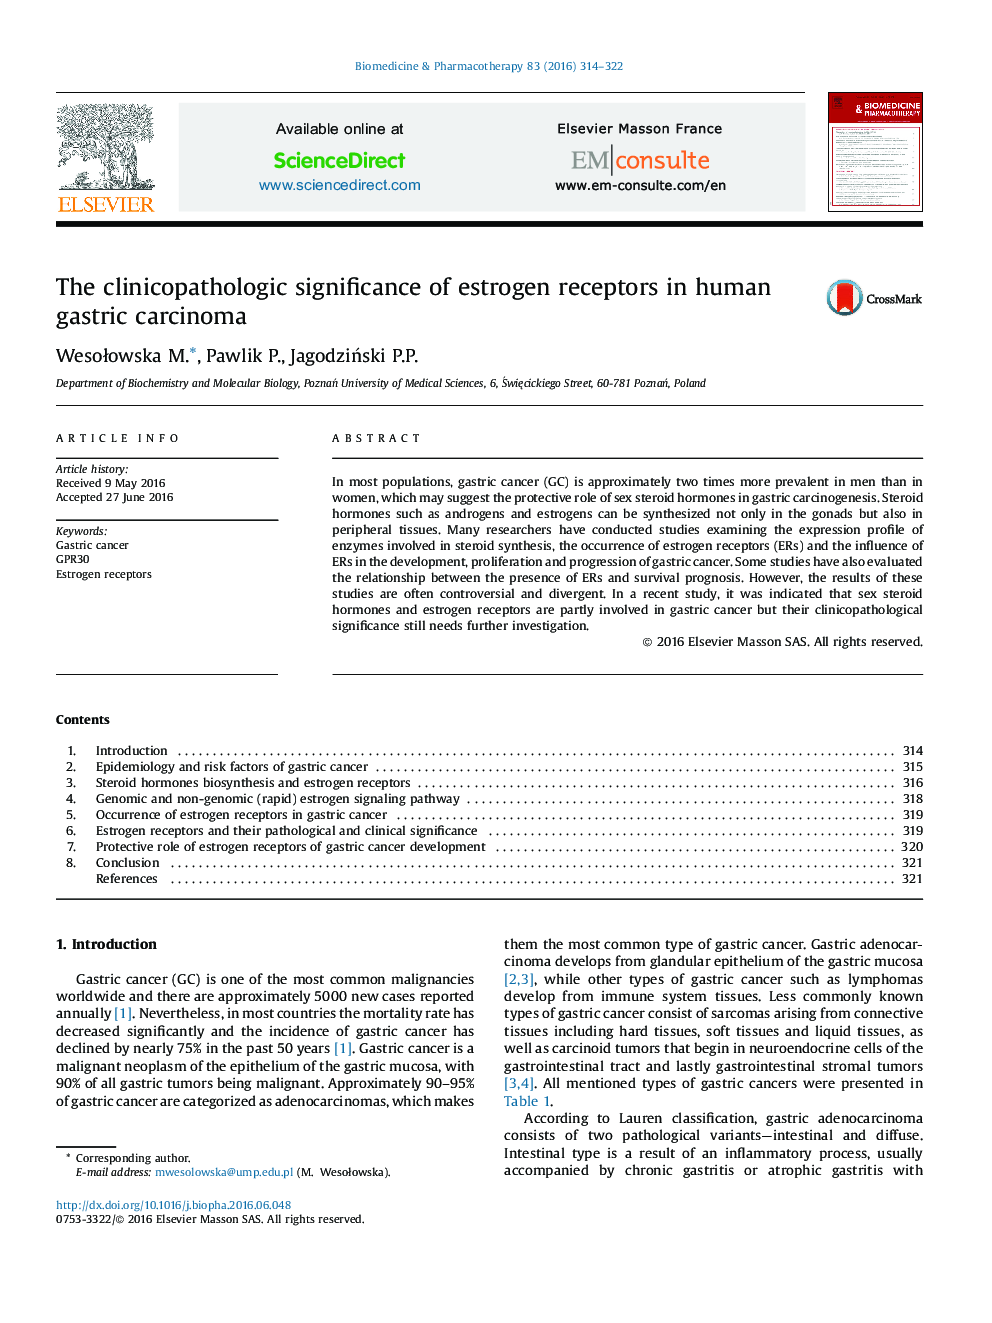 The clinicopathologic significance of estrogen receptors in human gastric carcinoma